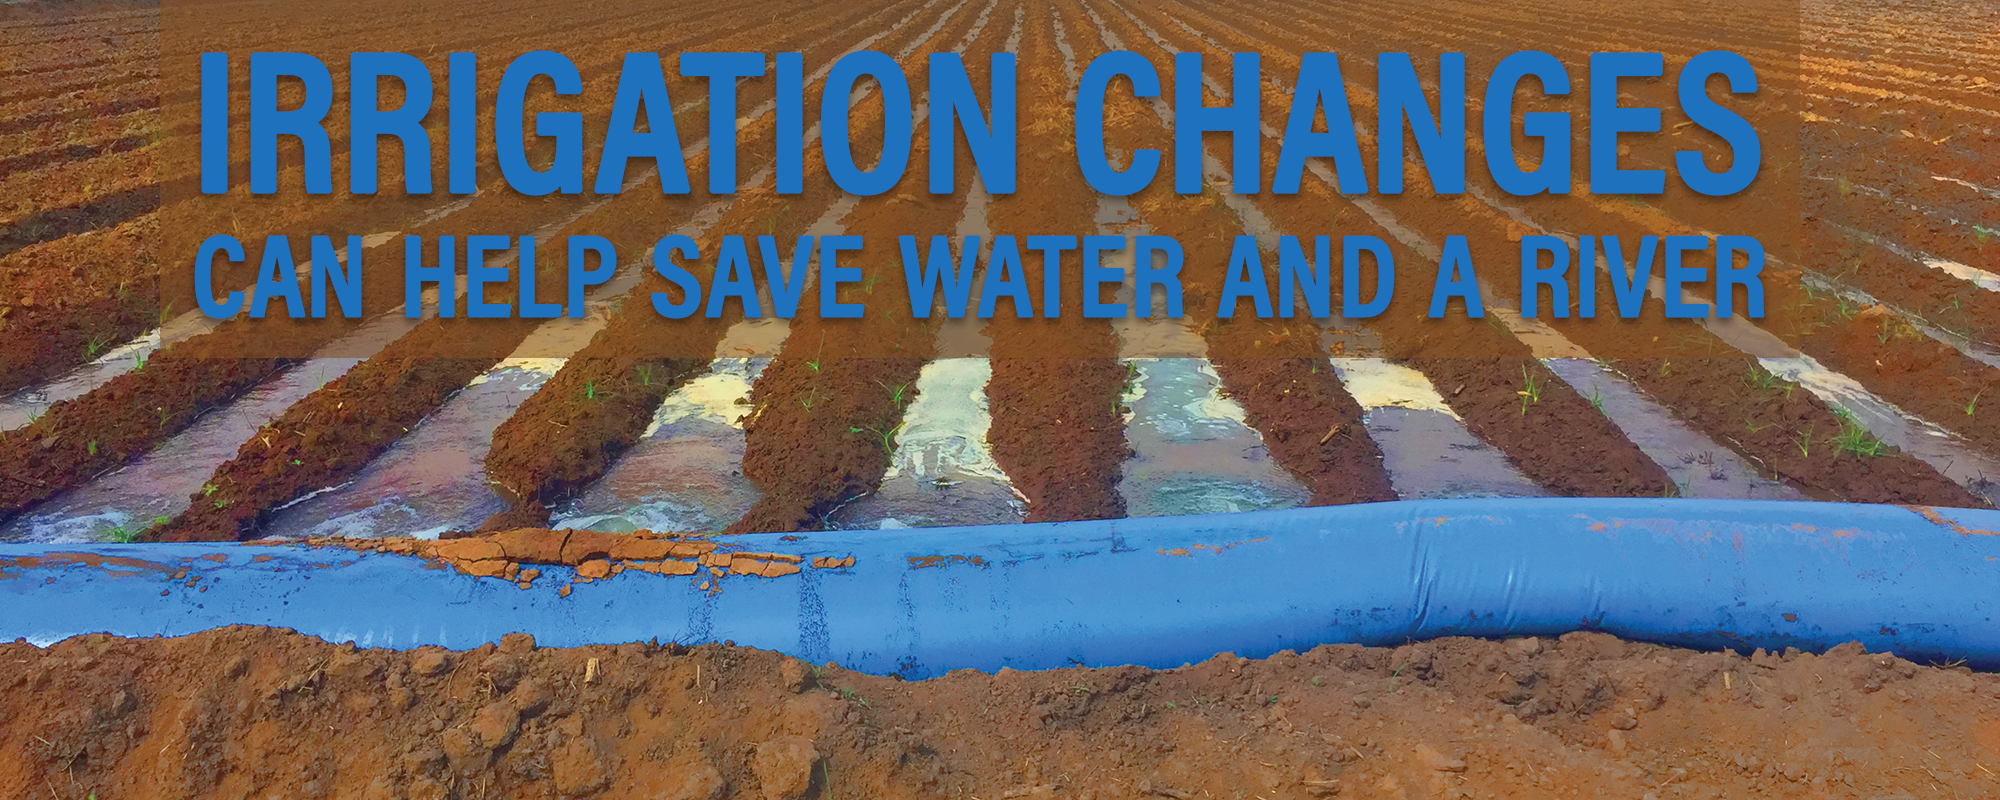 Irrigation Changes Can Help Save Water and a River